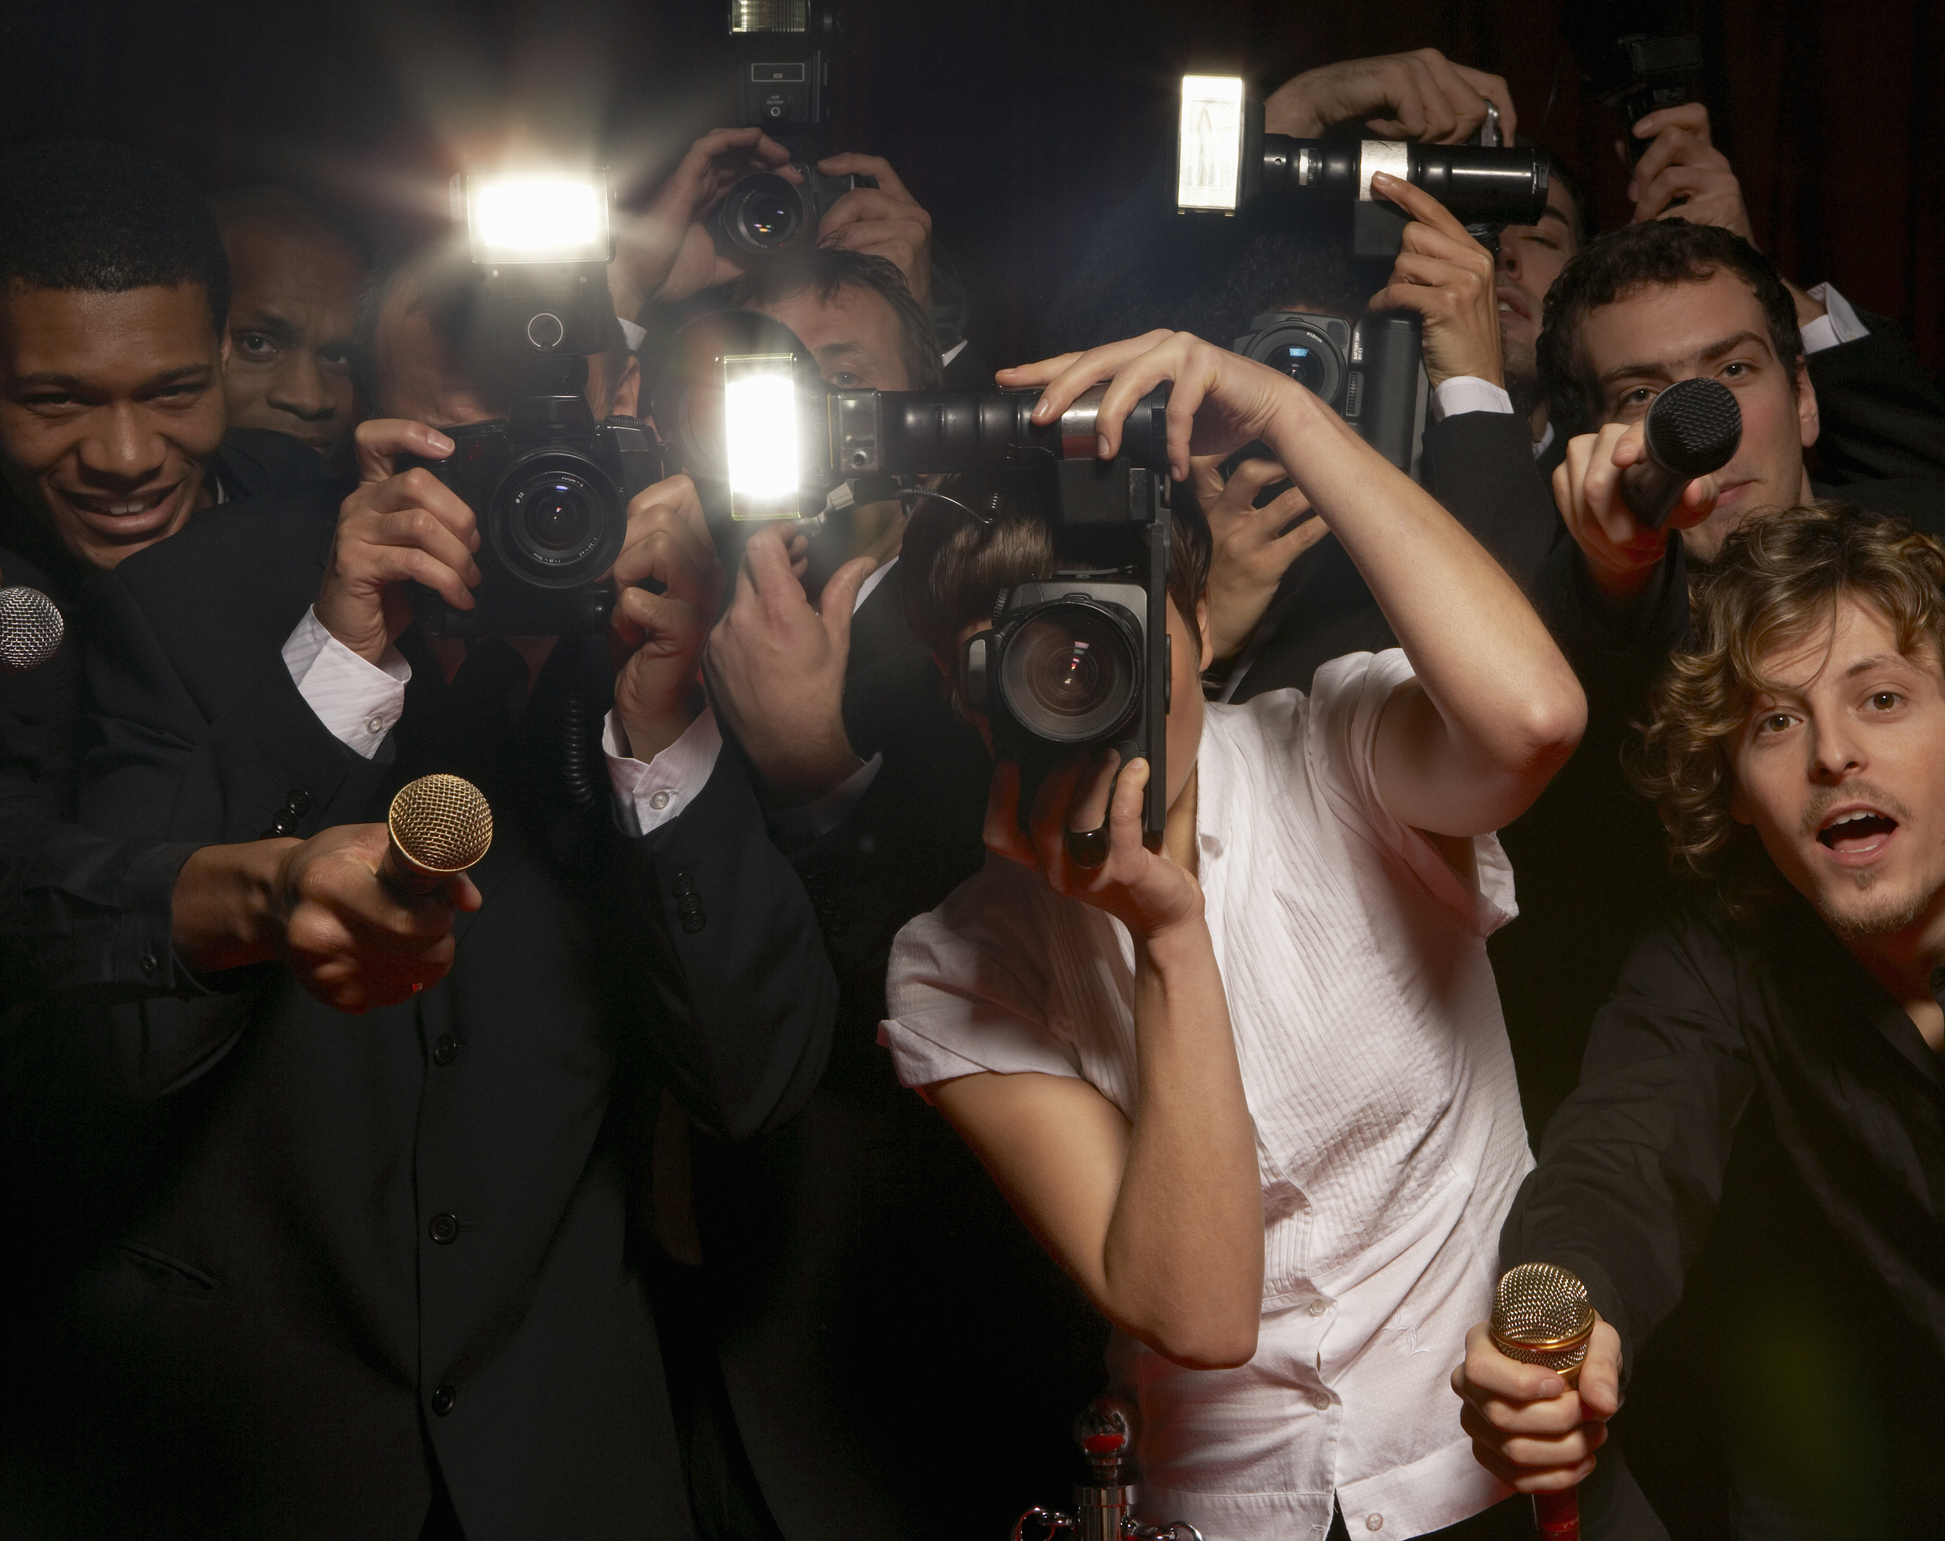 Paparazzi with cameras taking photos at an event, possibly indicating celebrity presence or an important social function related to fame and wealth